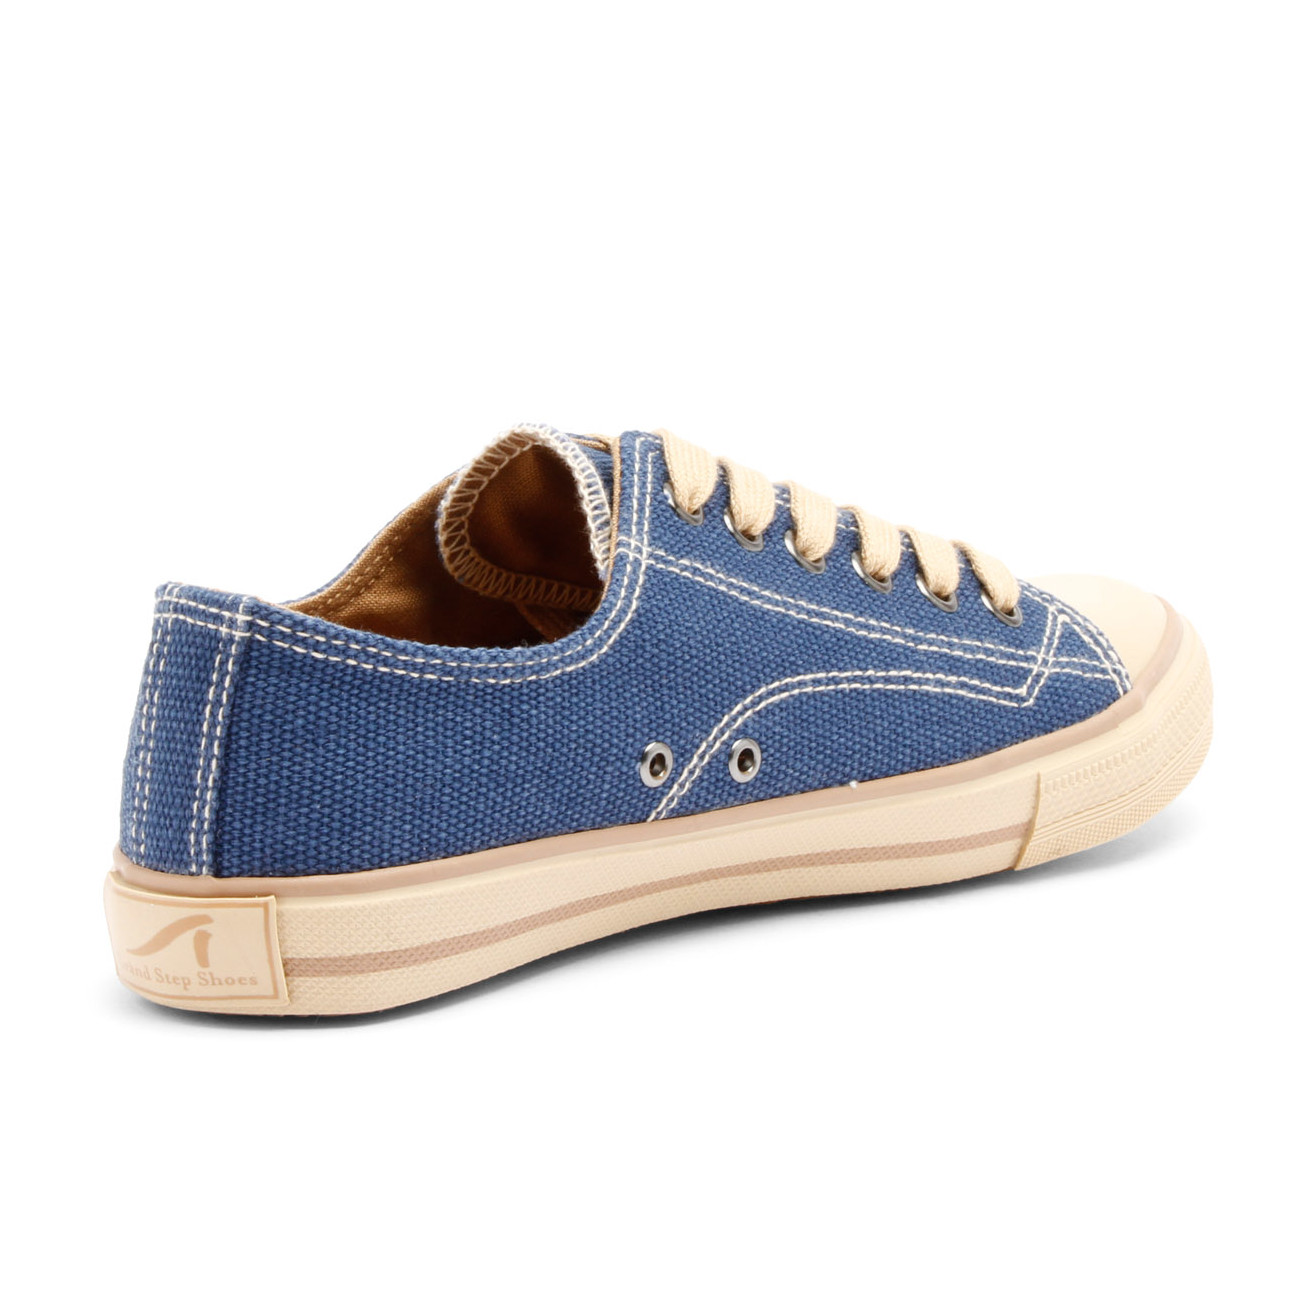 Grand Step Shoes - Marley Navy-